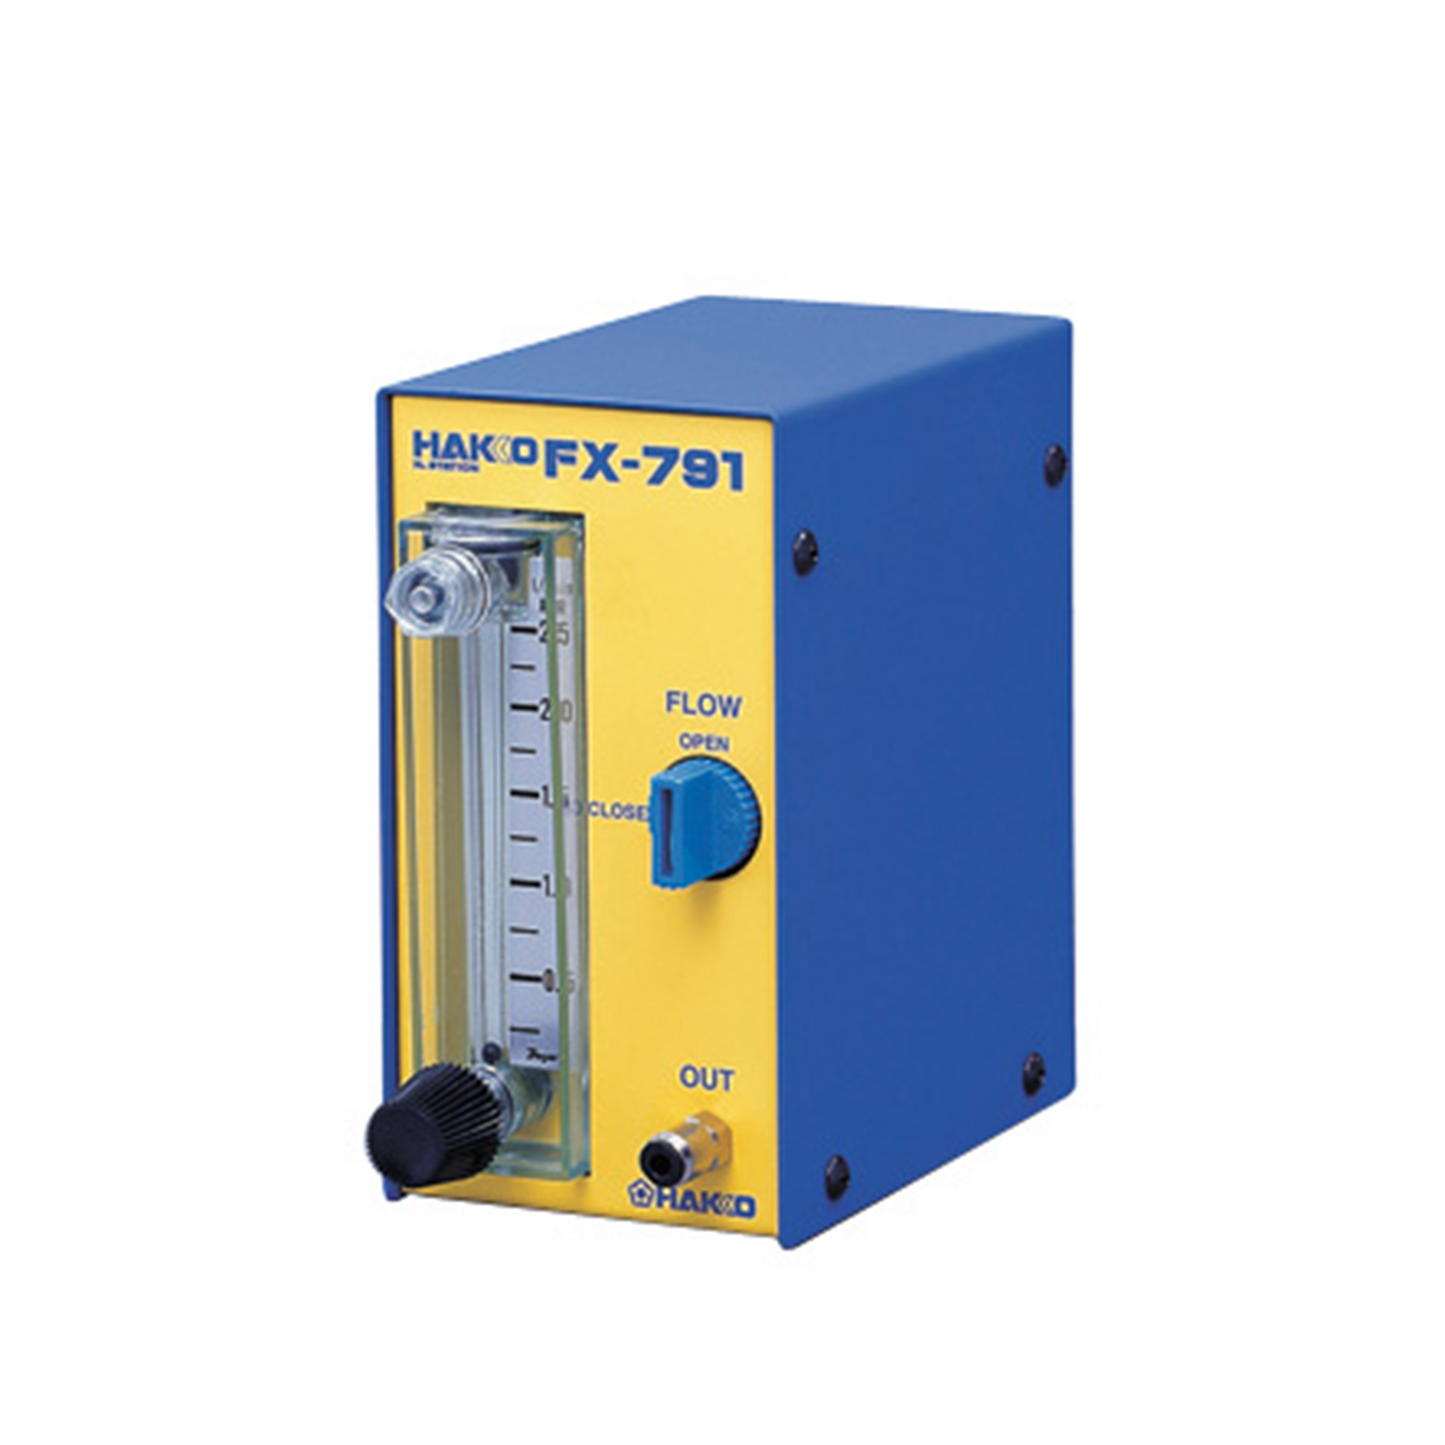 Hakko N2 flowmeter FX791 to regulate and control air flow for N2 soldering iron use for SMT assembly production line ESD safe lead free RoHS compliant